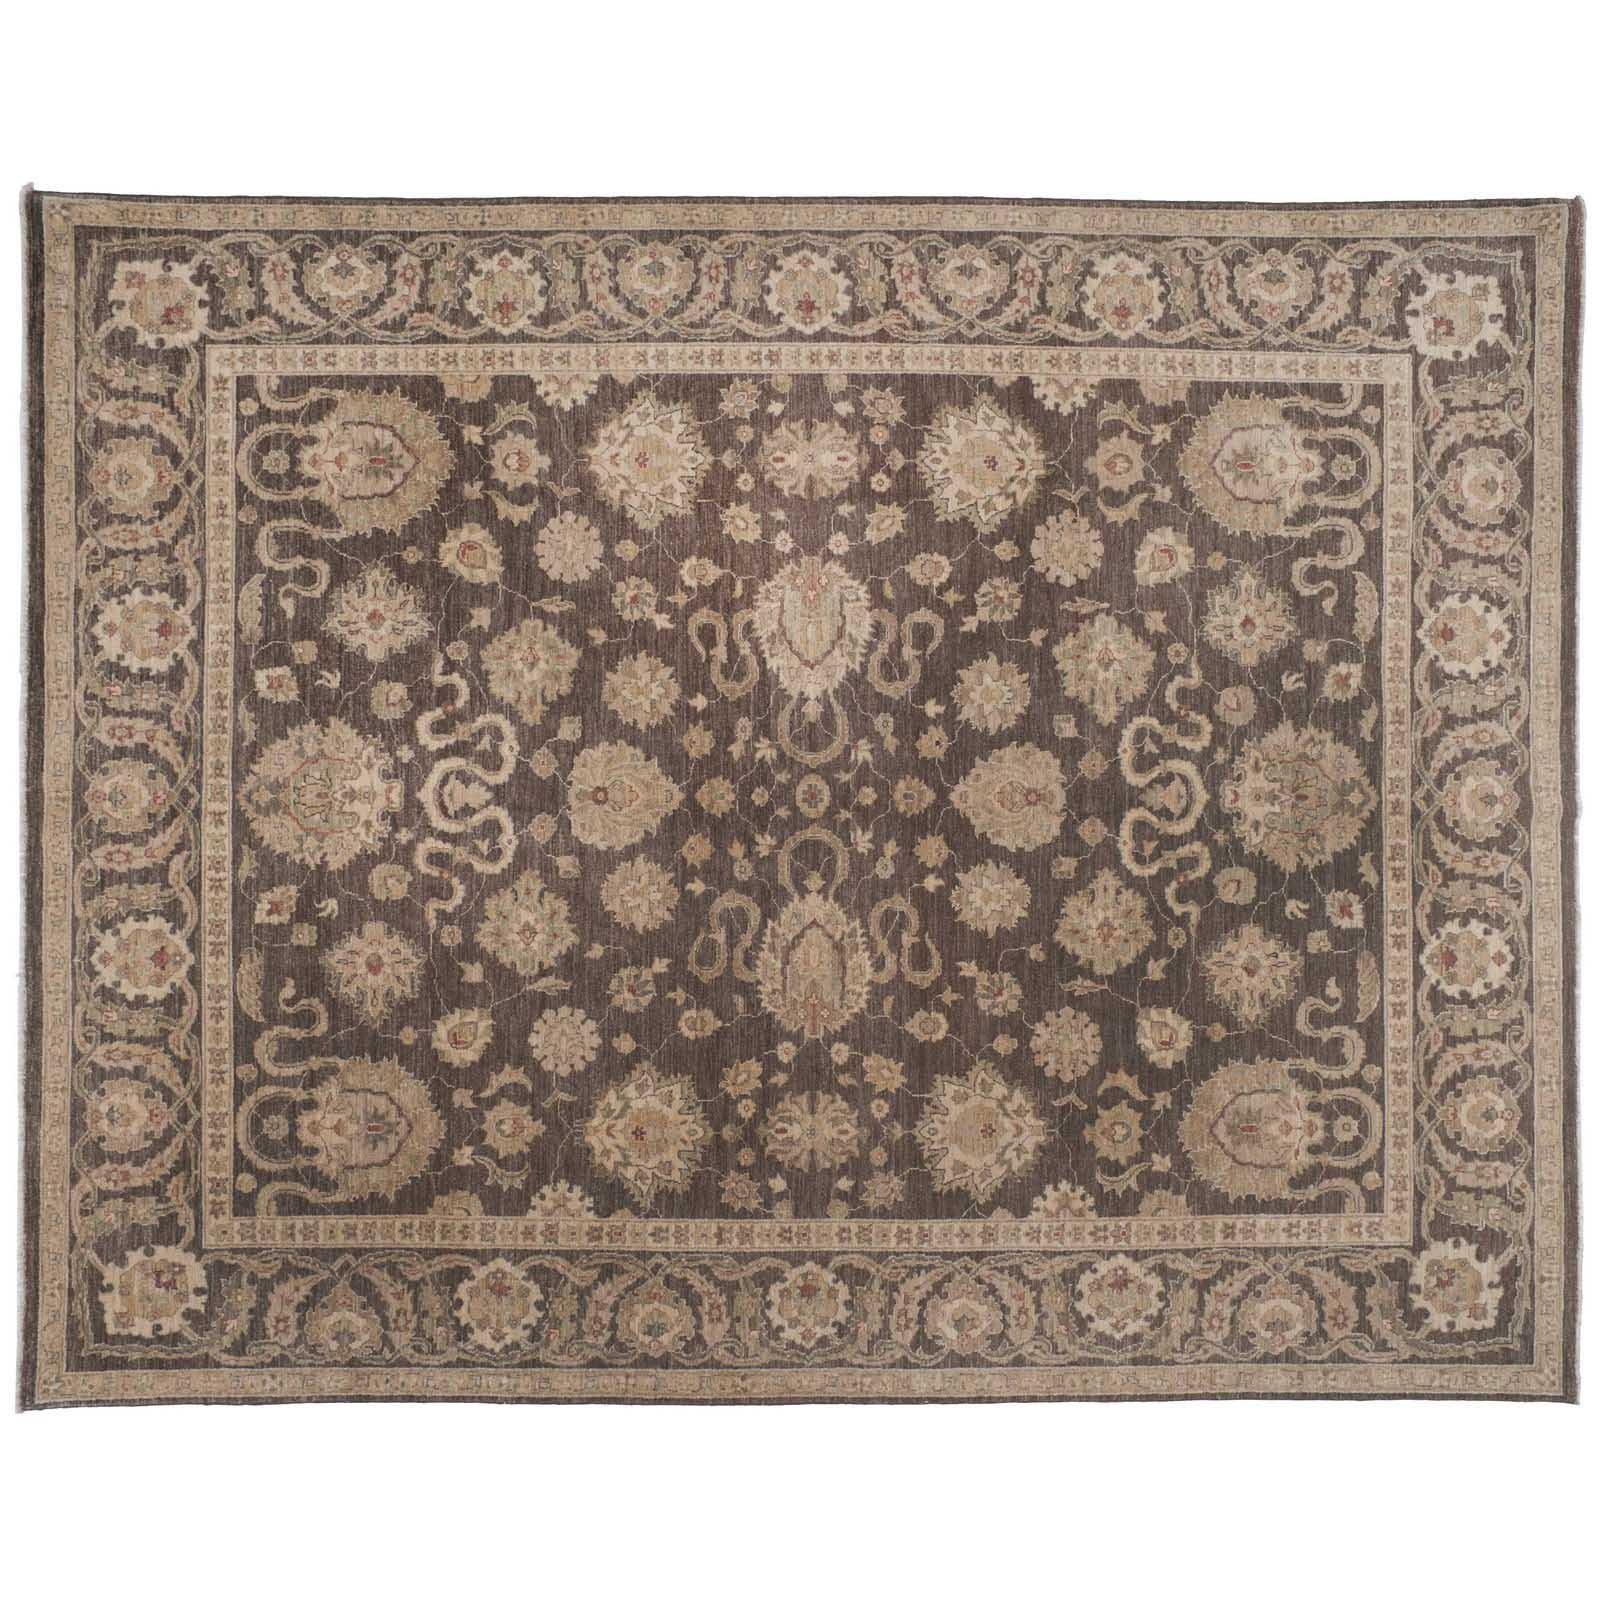 Brown Traditional Pakistani Floral Area Rug For Sale